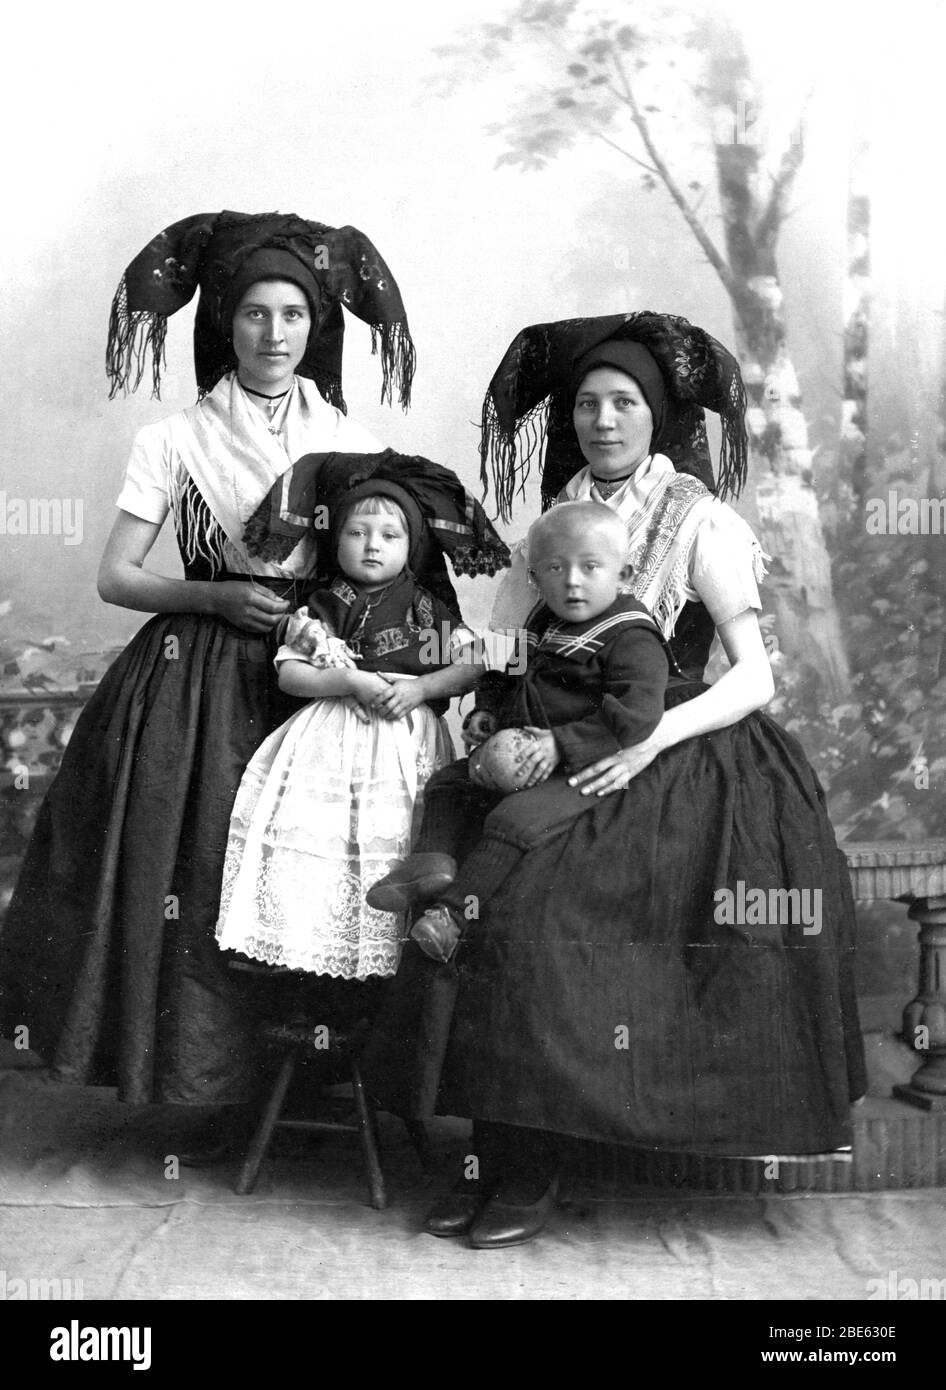 Spreewälderinnen.  These are traditional folklore costumes from the Spree (River) Forest, southeast of Berlin, Germany. This 1870s photo is from CottBus, Germany. Today's versions of these head-dresses are much more expanded and more colorful. Note the small shawl-like accessories on the women and the finely made dress on the little girl, who holds a doll. The boy, in a sailor uniform, holds a ball or mellon or ??  The women and girl each wear a cross on a necklace. The women wear simple but fine-looking shoes.   To see my other unusual vintage images, Search:  Prestor  vintage  odd  [or hats] Stock Photo